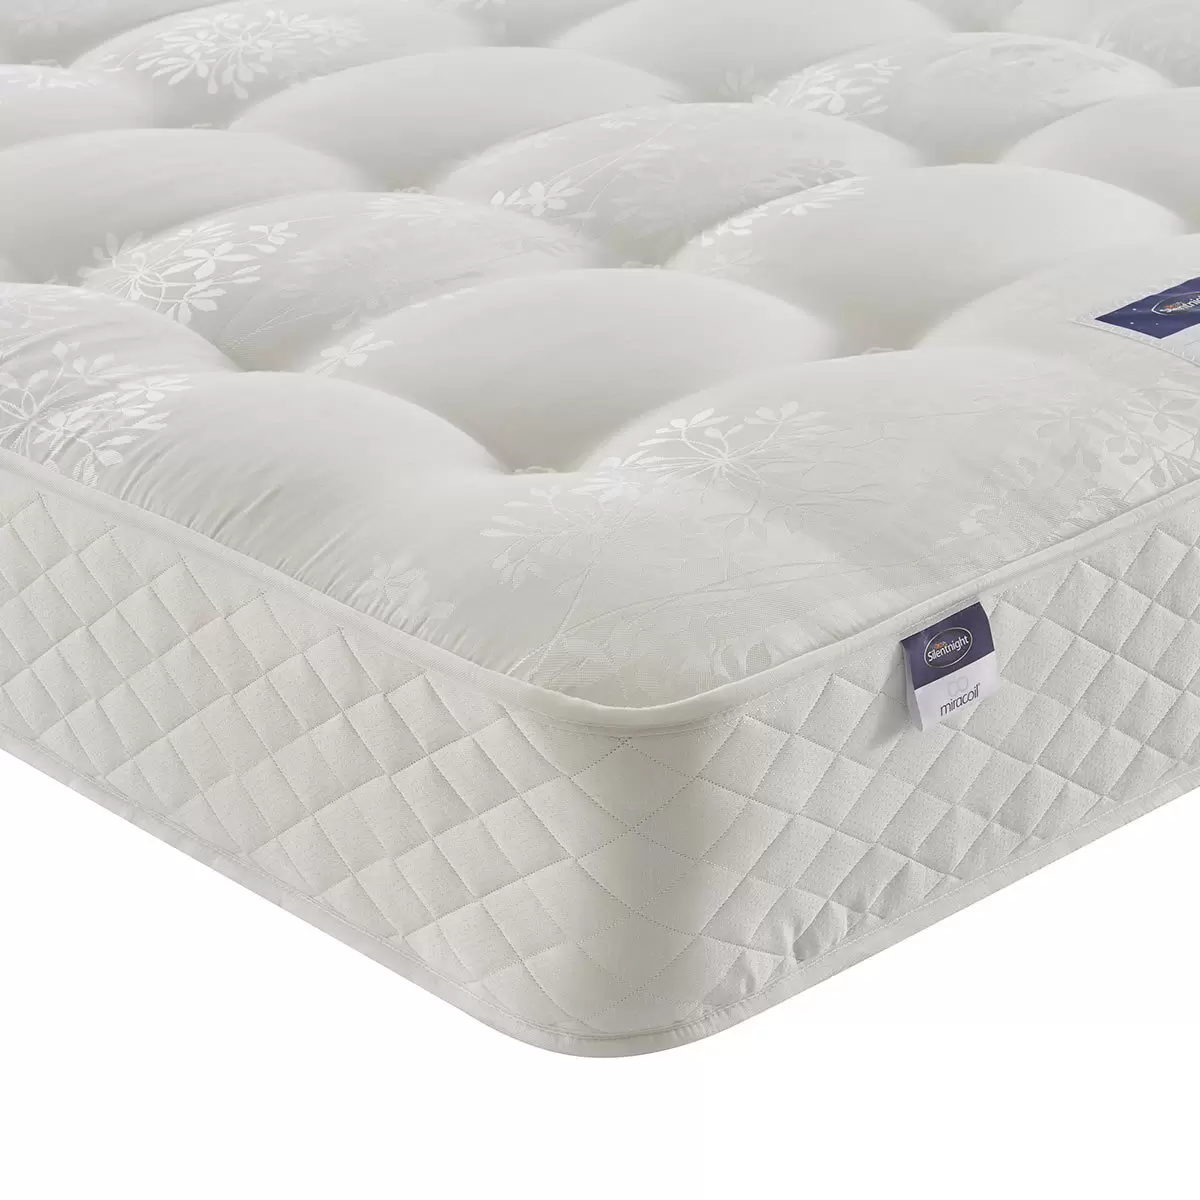 Silentnight Bexley Eco Miracoil Ortho Mattress Collection